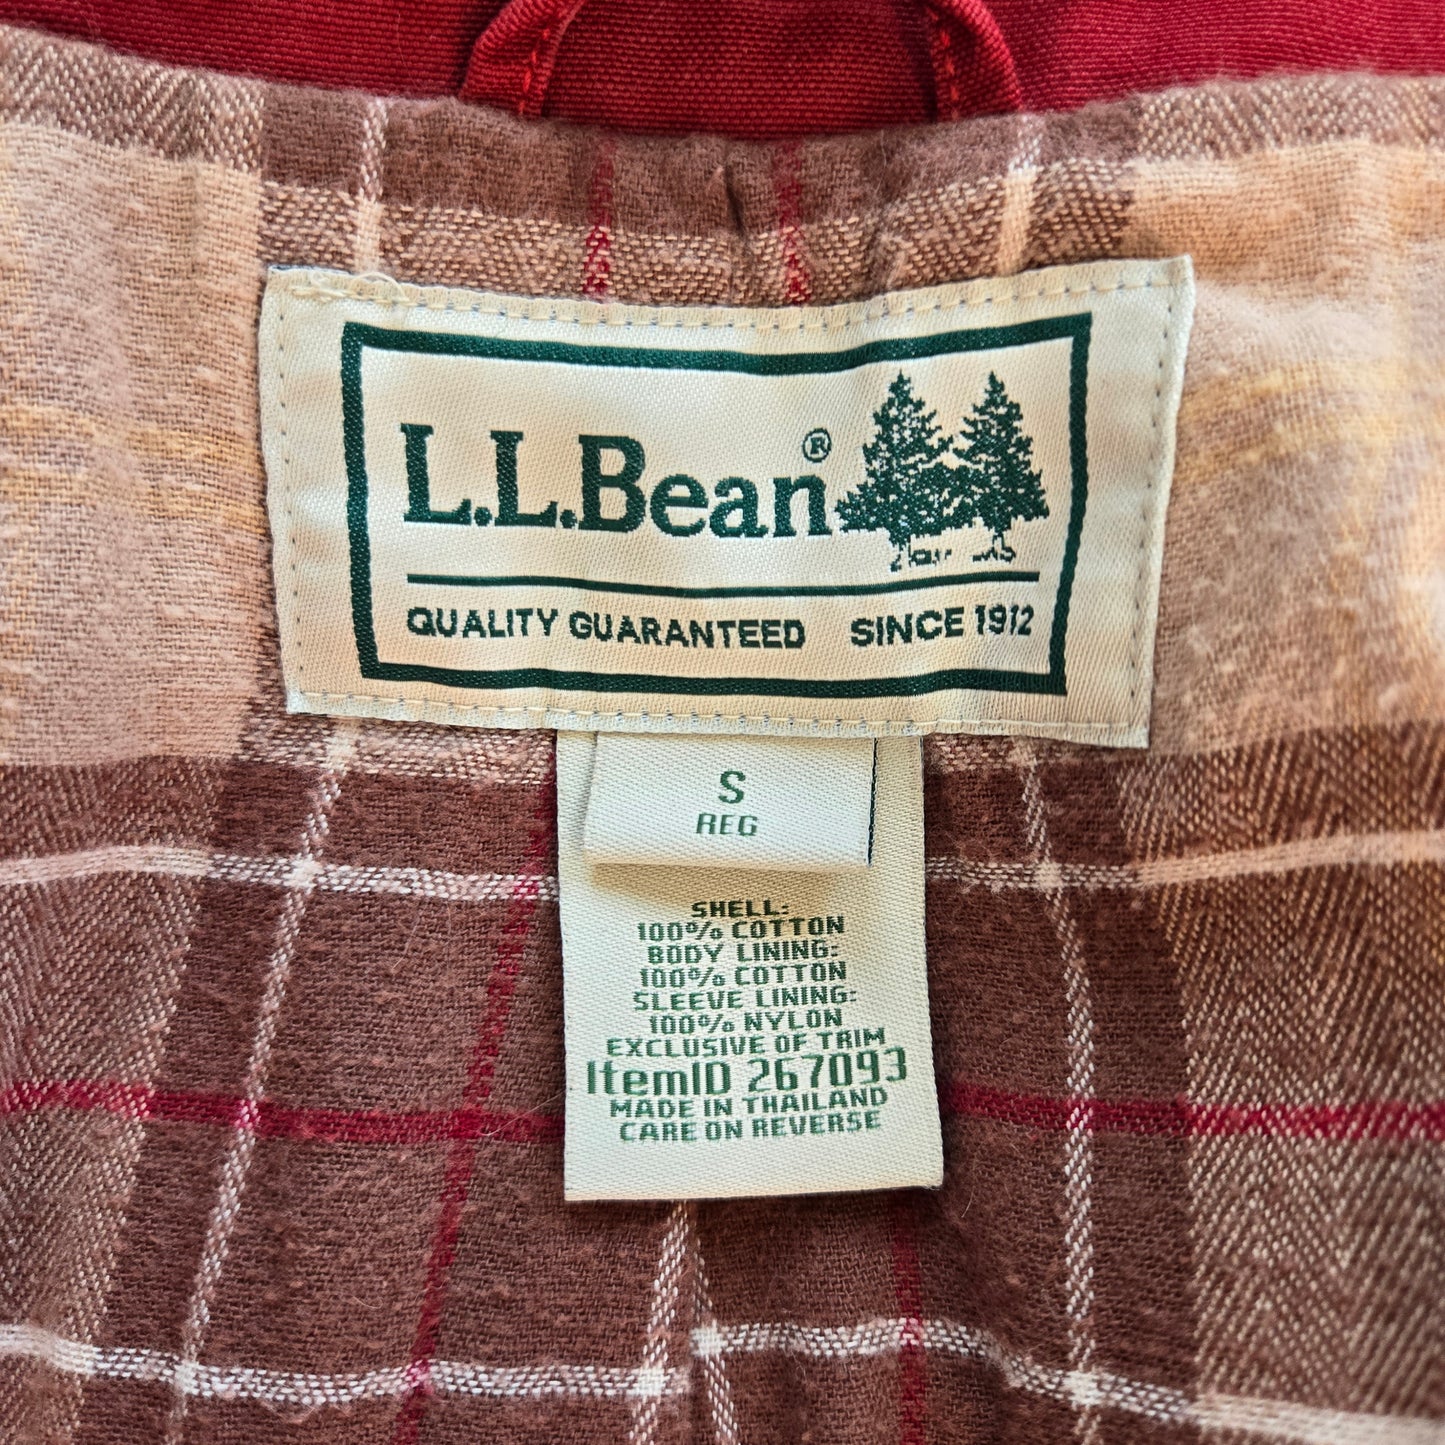 L.L. Bean Vintage Red Canvas Barn Jacket with Corduroy Trim - small